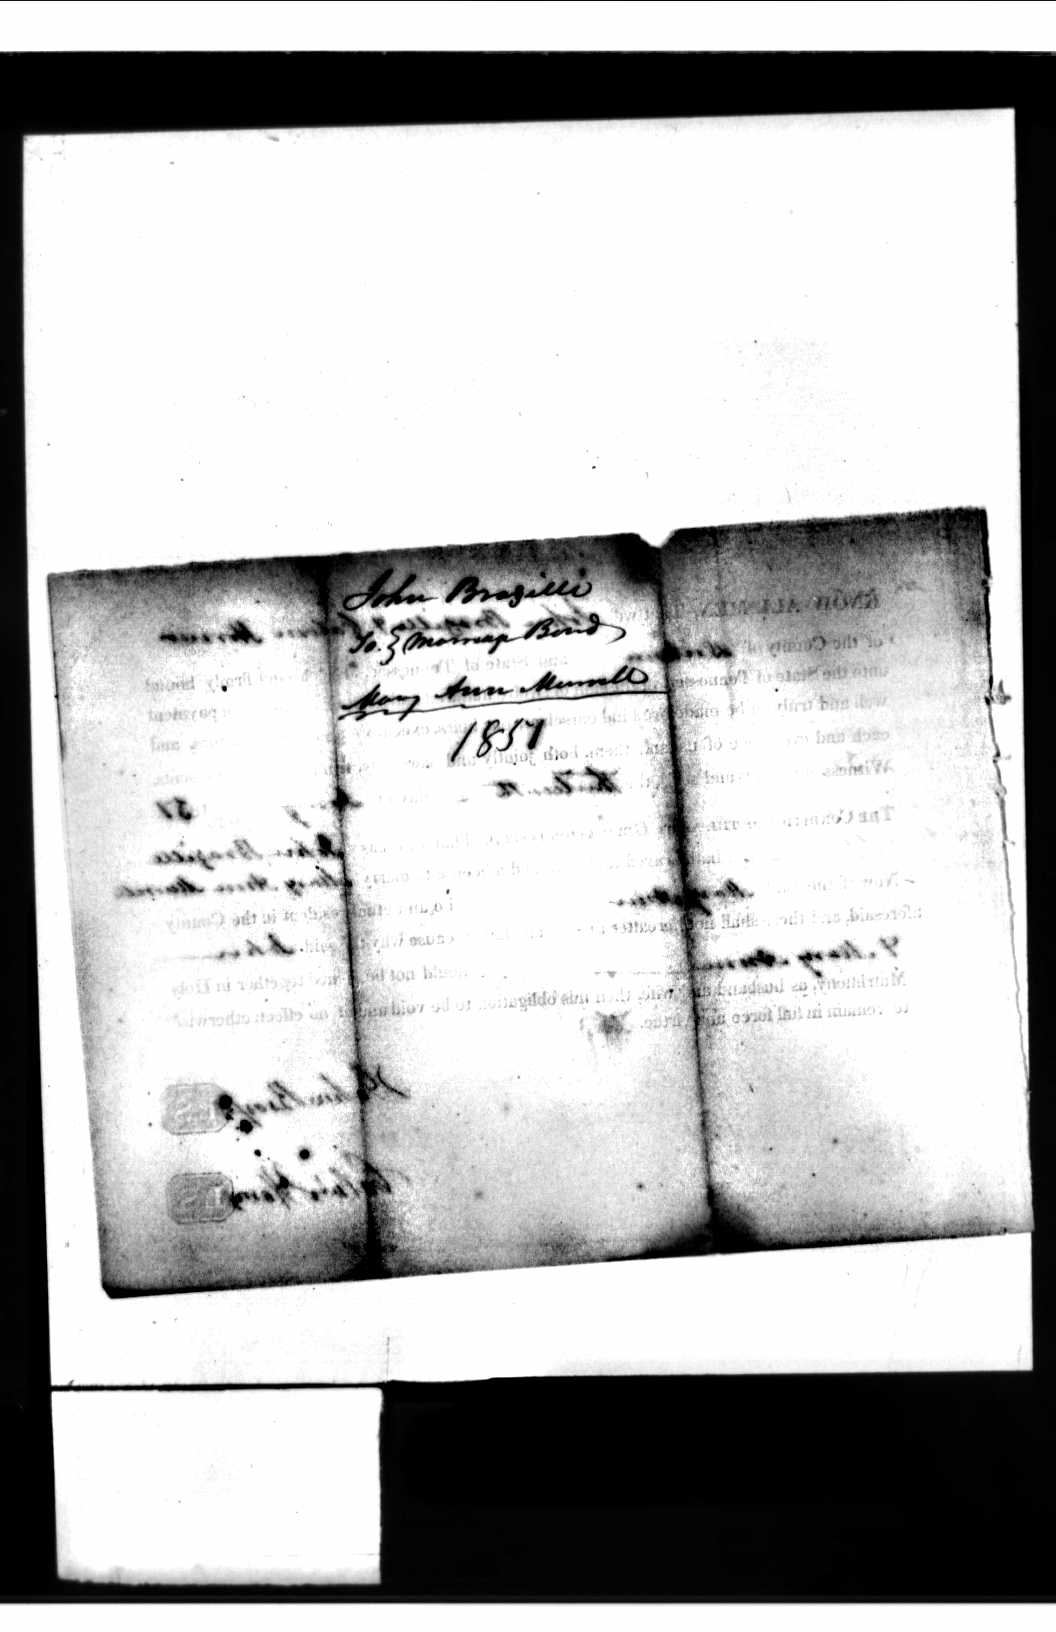 John Brazzell, marriage bond (cover only), to Mary Ann Murrell, 1851; county not stated, probably Dickson County, Tennessee